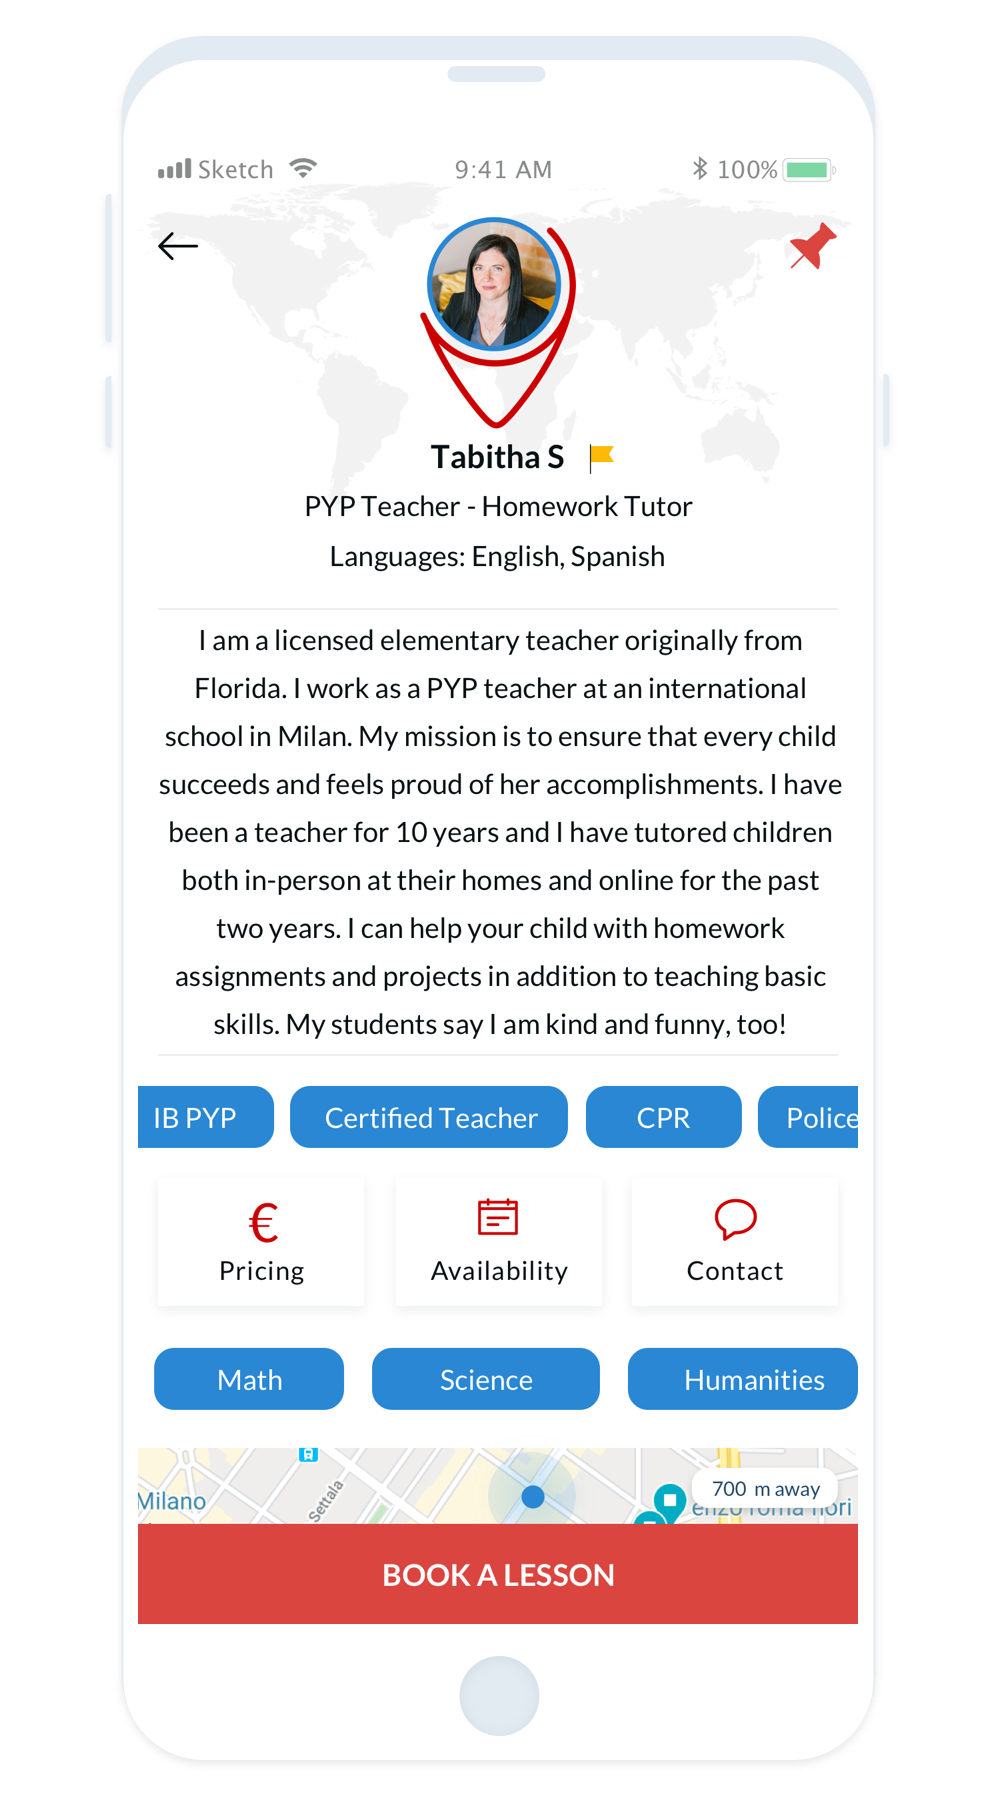 Tutor Around makes it easy to post your tutoring advertisement and get found worldwide! Look at other tutoring ads examples.